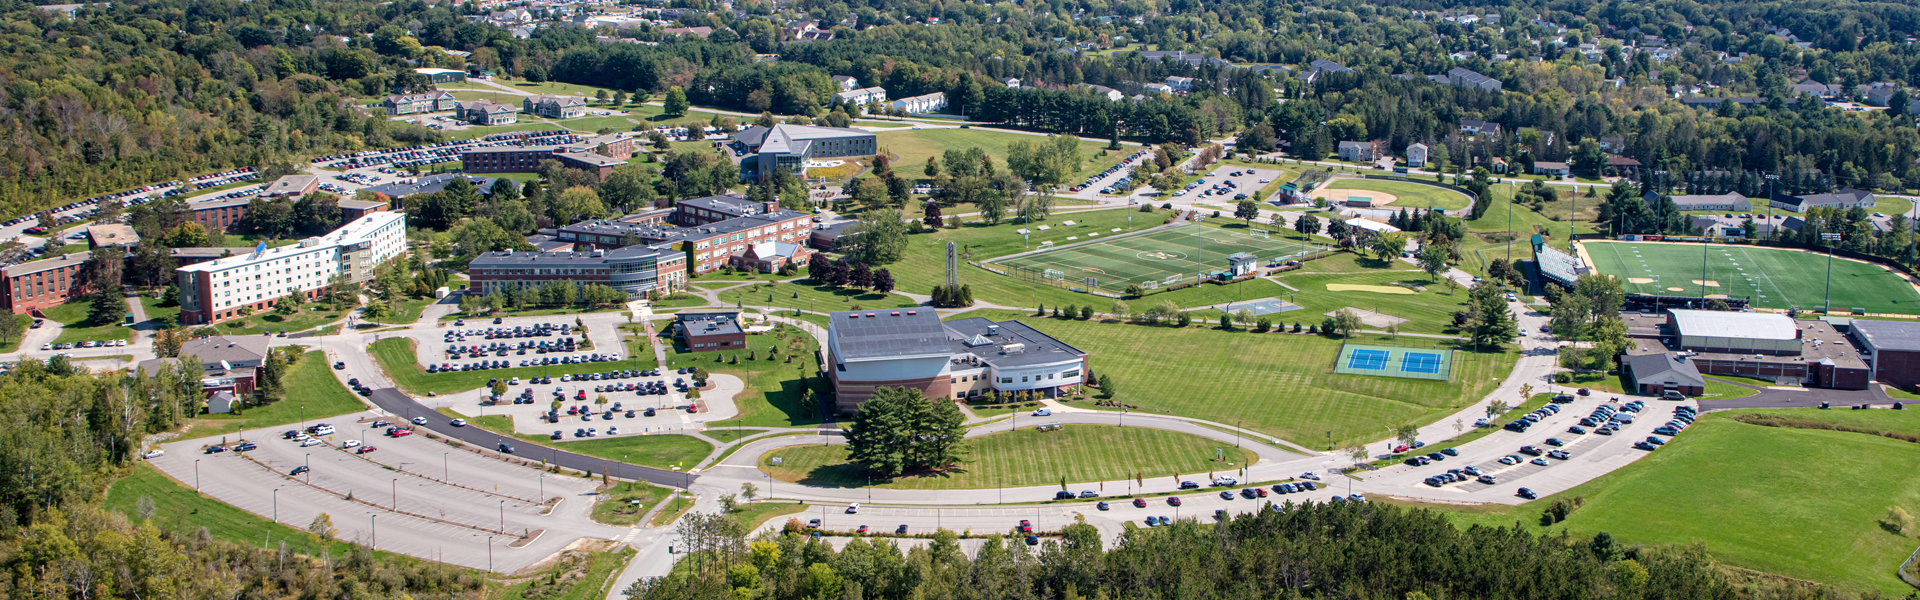 Aerial image of One College Circle